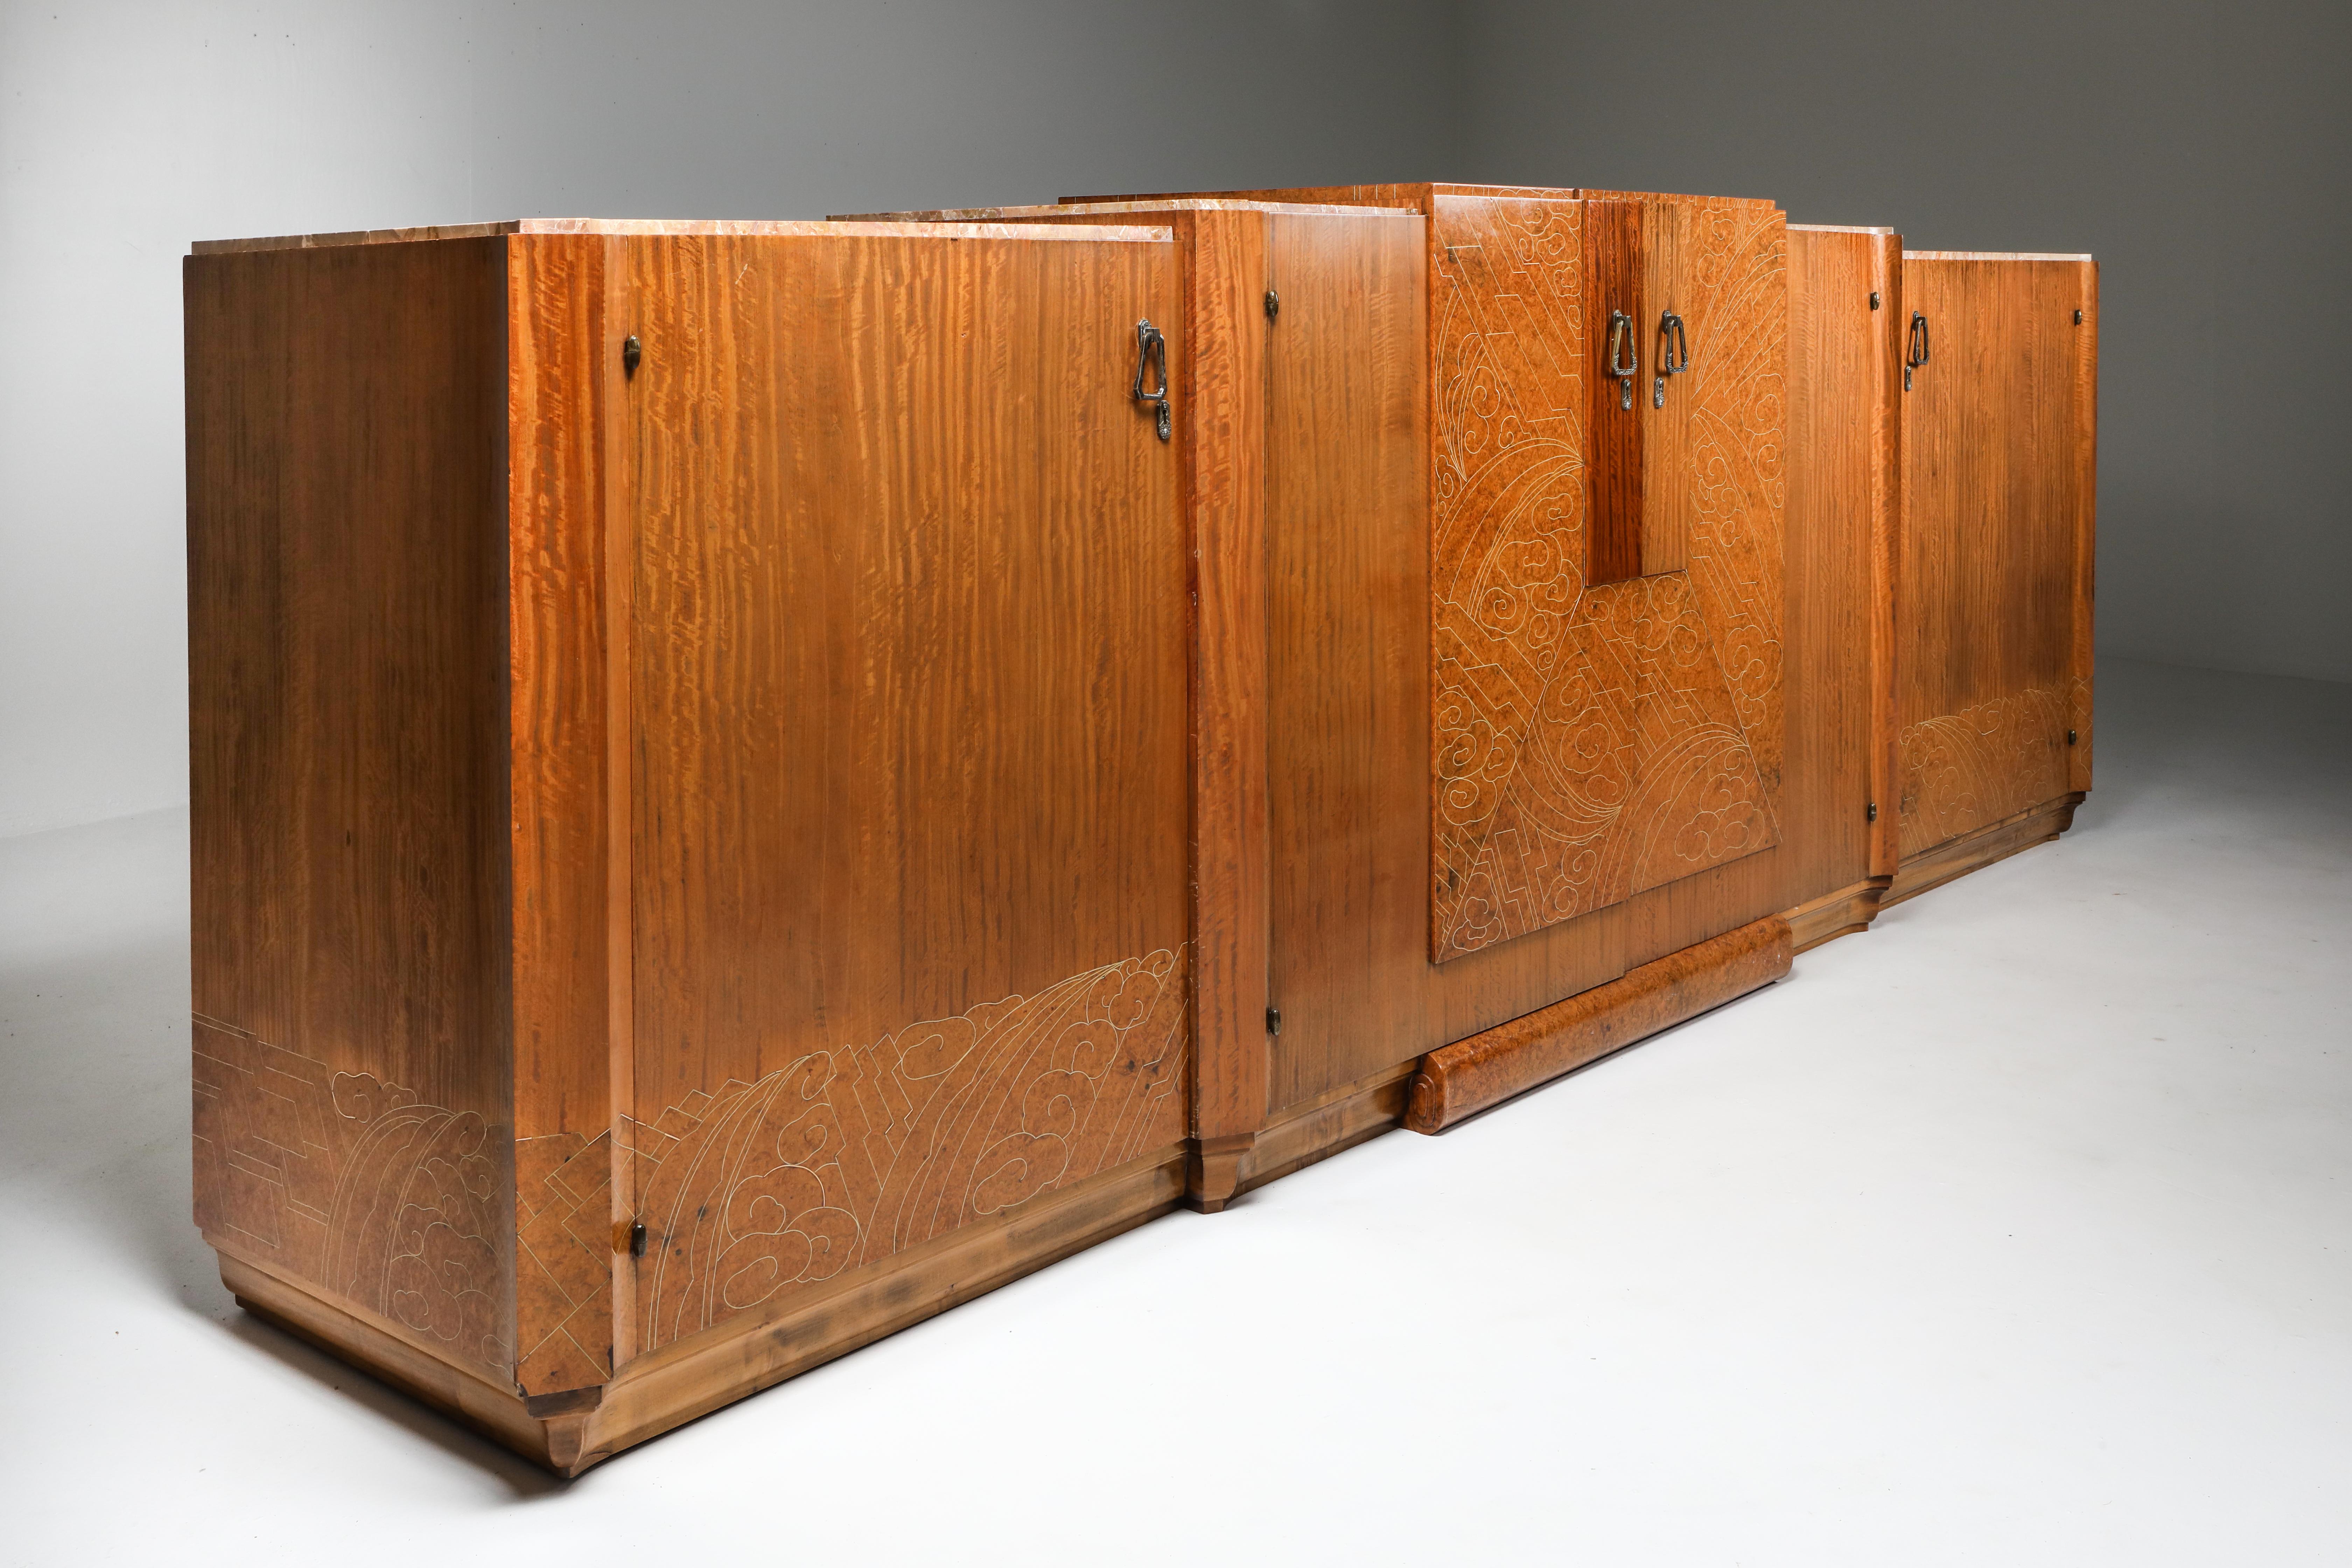 Art Deco High-End Credenza, Mahogany, Burl, Loupe D'amboine and Marble, 1930's For Sale 7